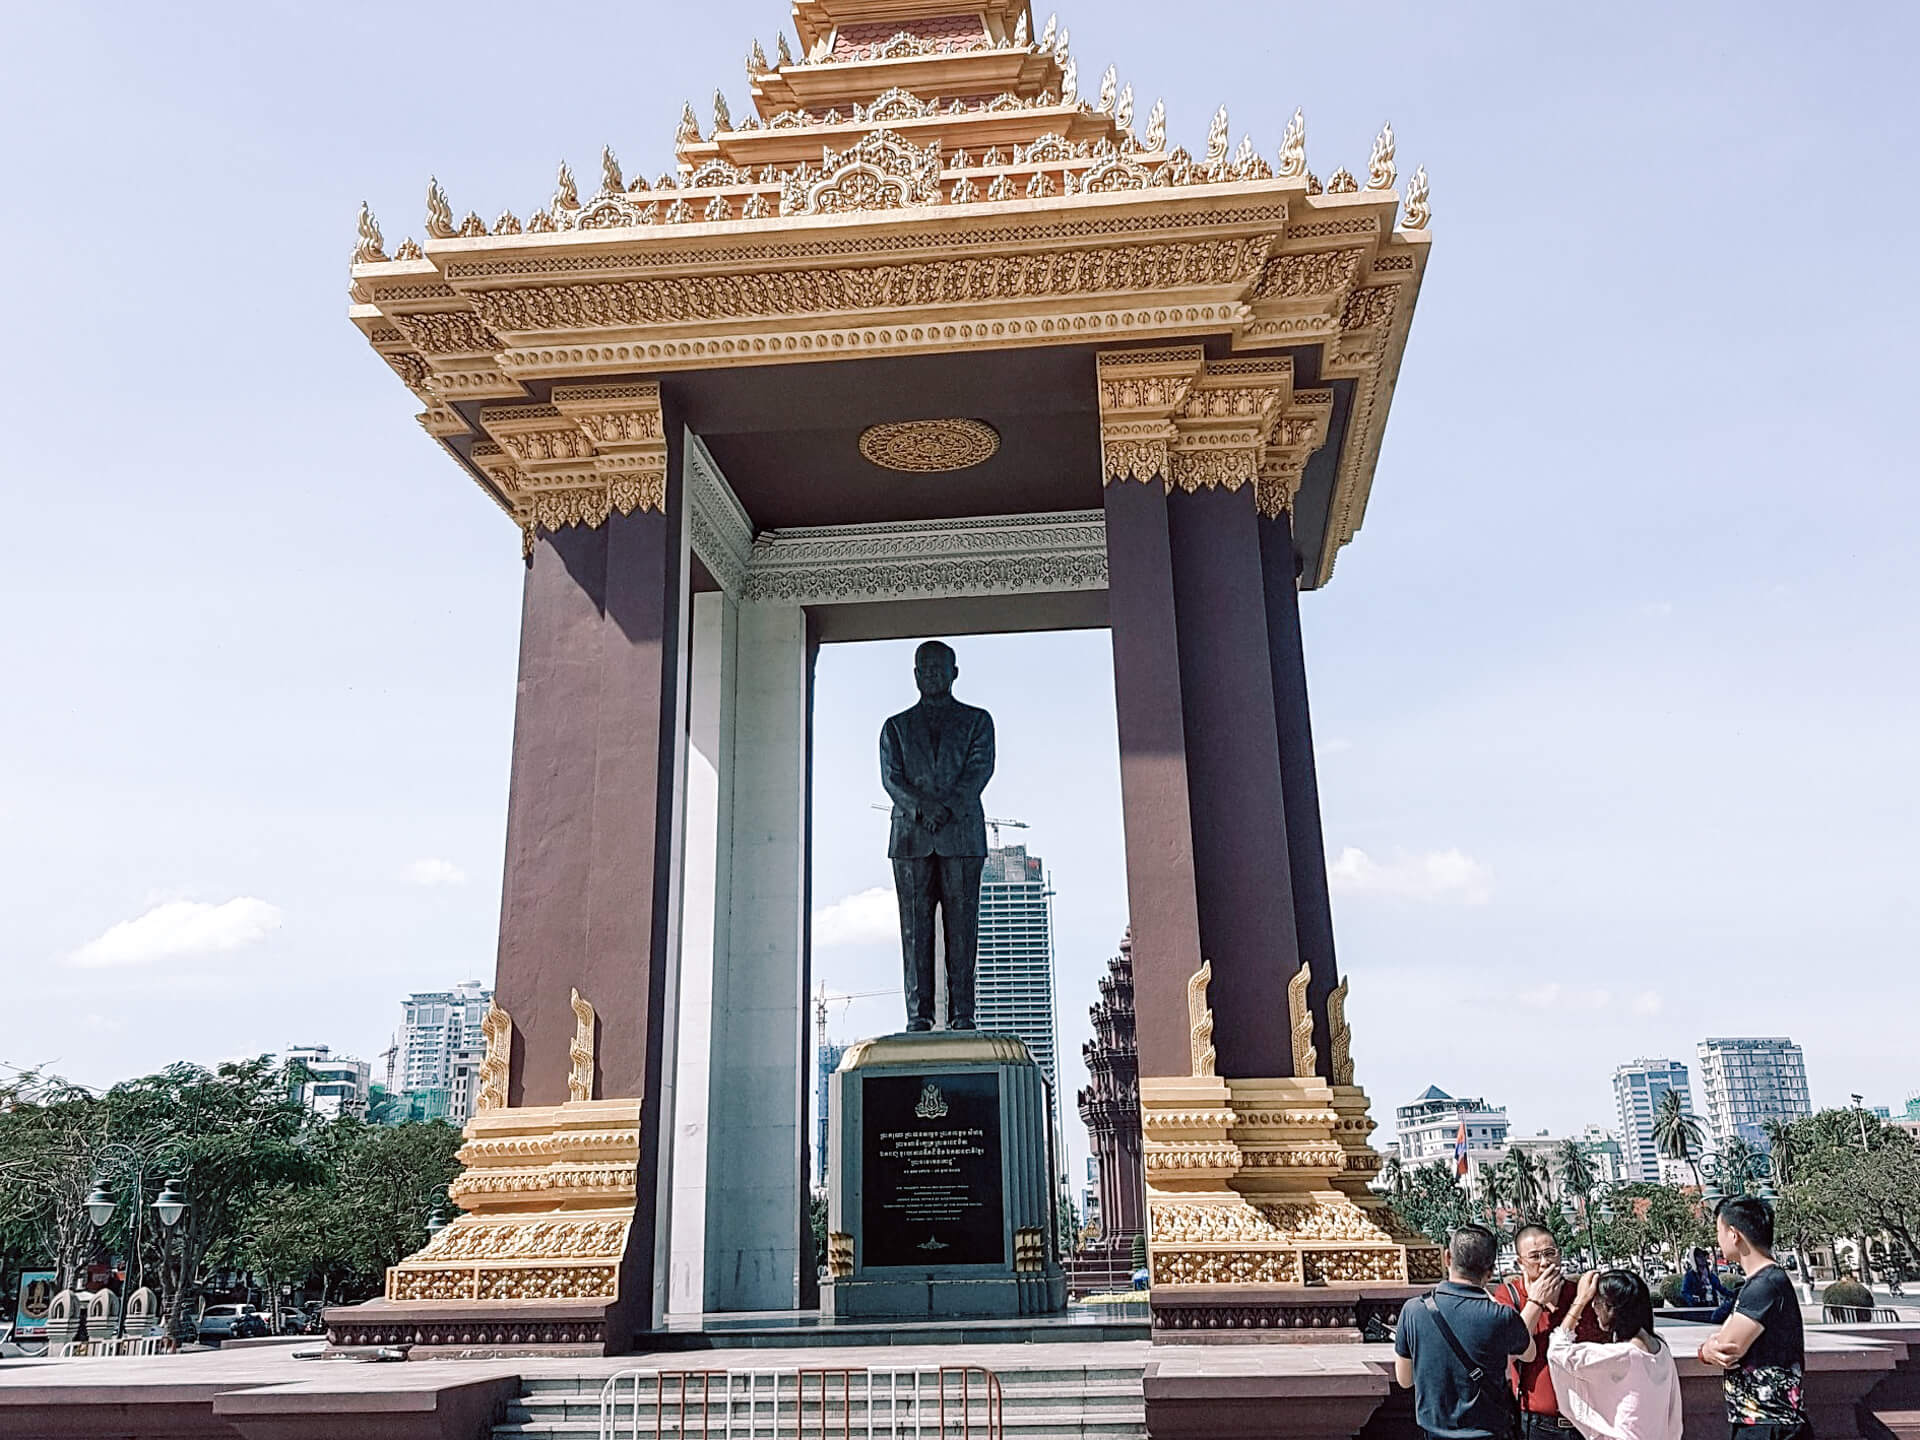 The Statue of King Father Norodom Sihanouk